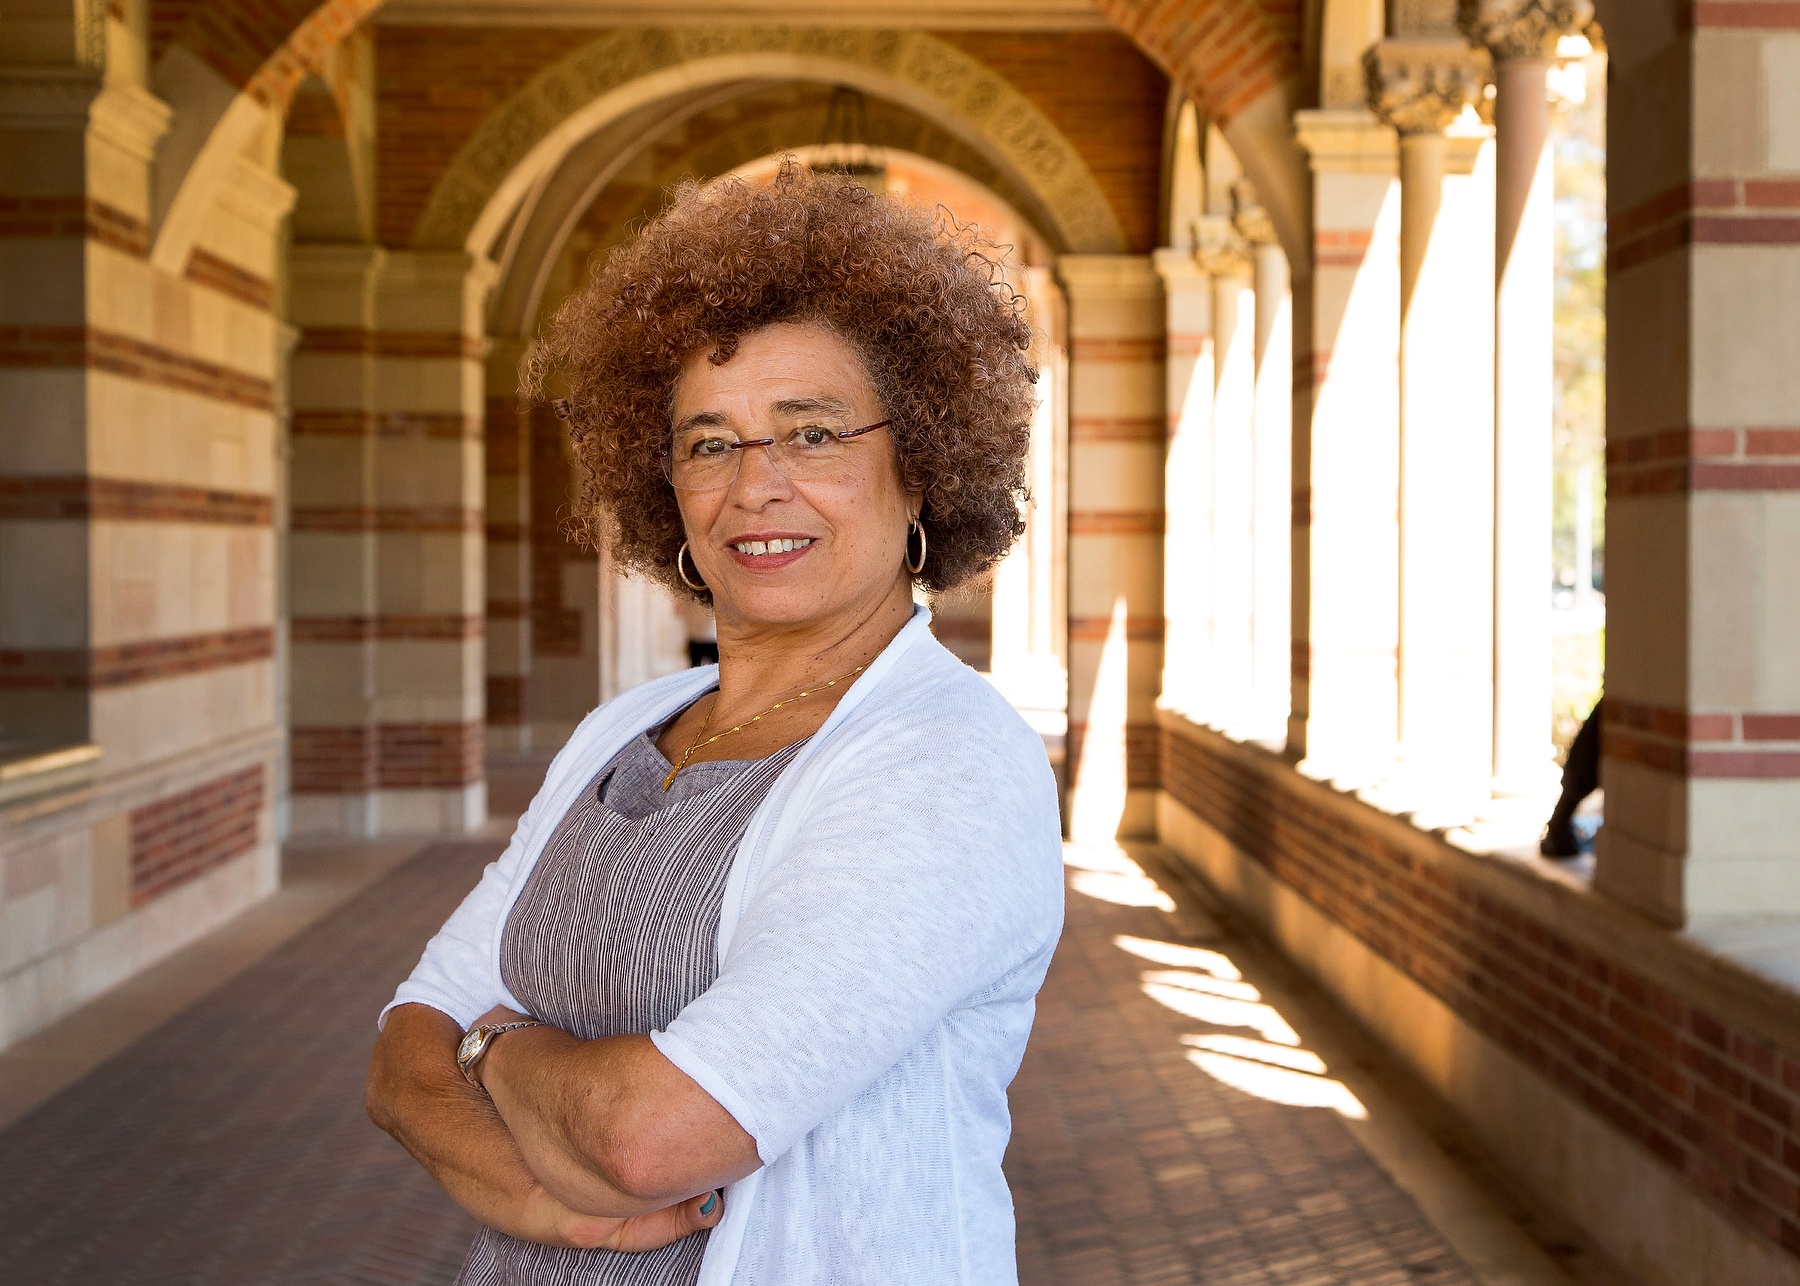 Angela David posing with her arms crossed as she stands in a brick, stone and terracotta corridor, with the sun illuminating stone columns in the background.